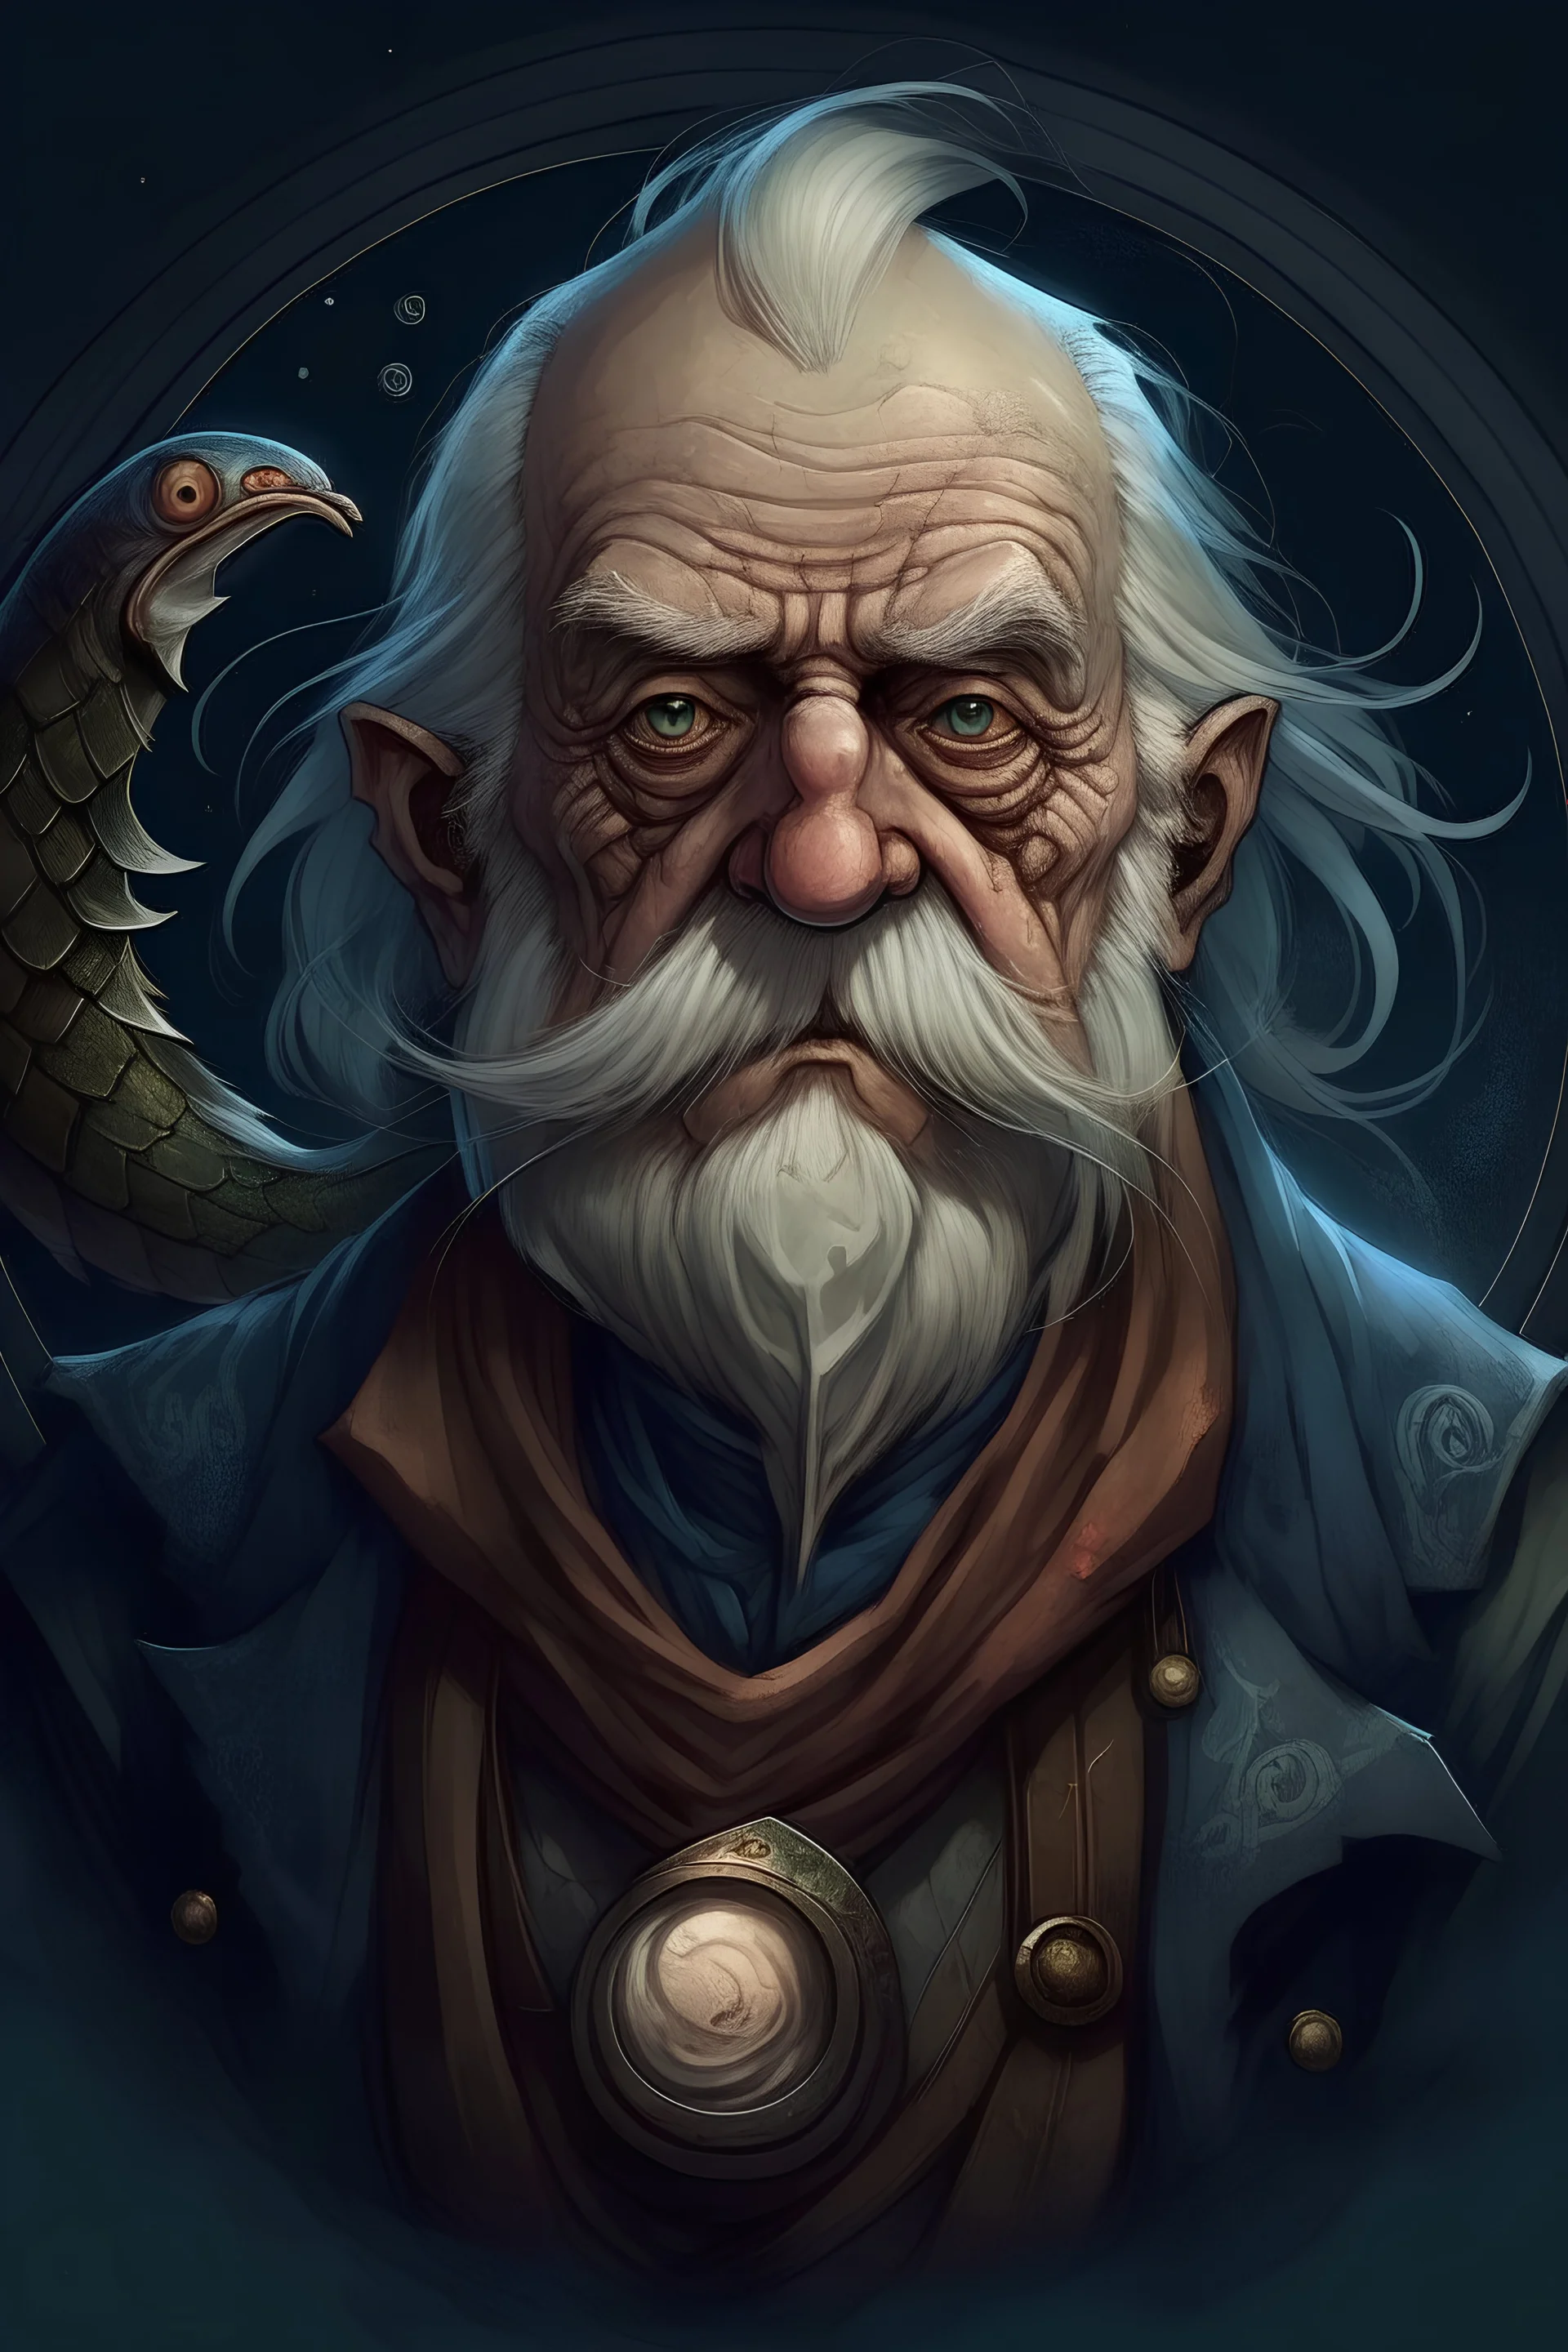 old man with moon iconography dnd portrait turns into a fish demon